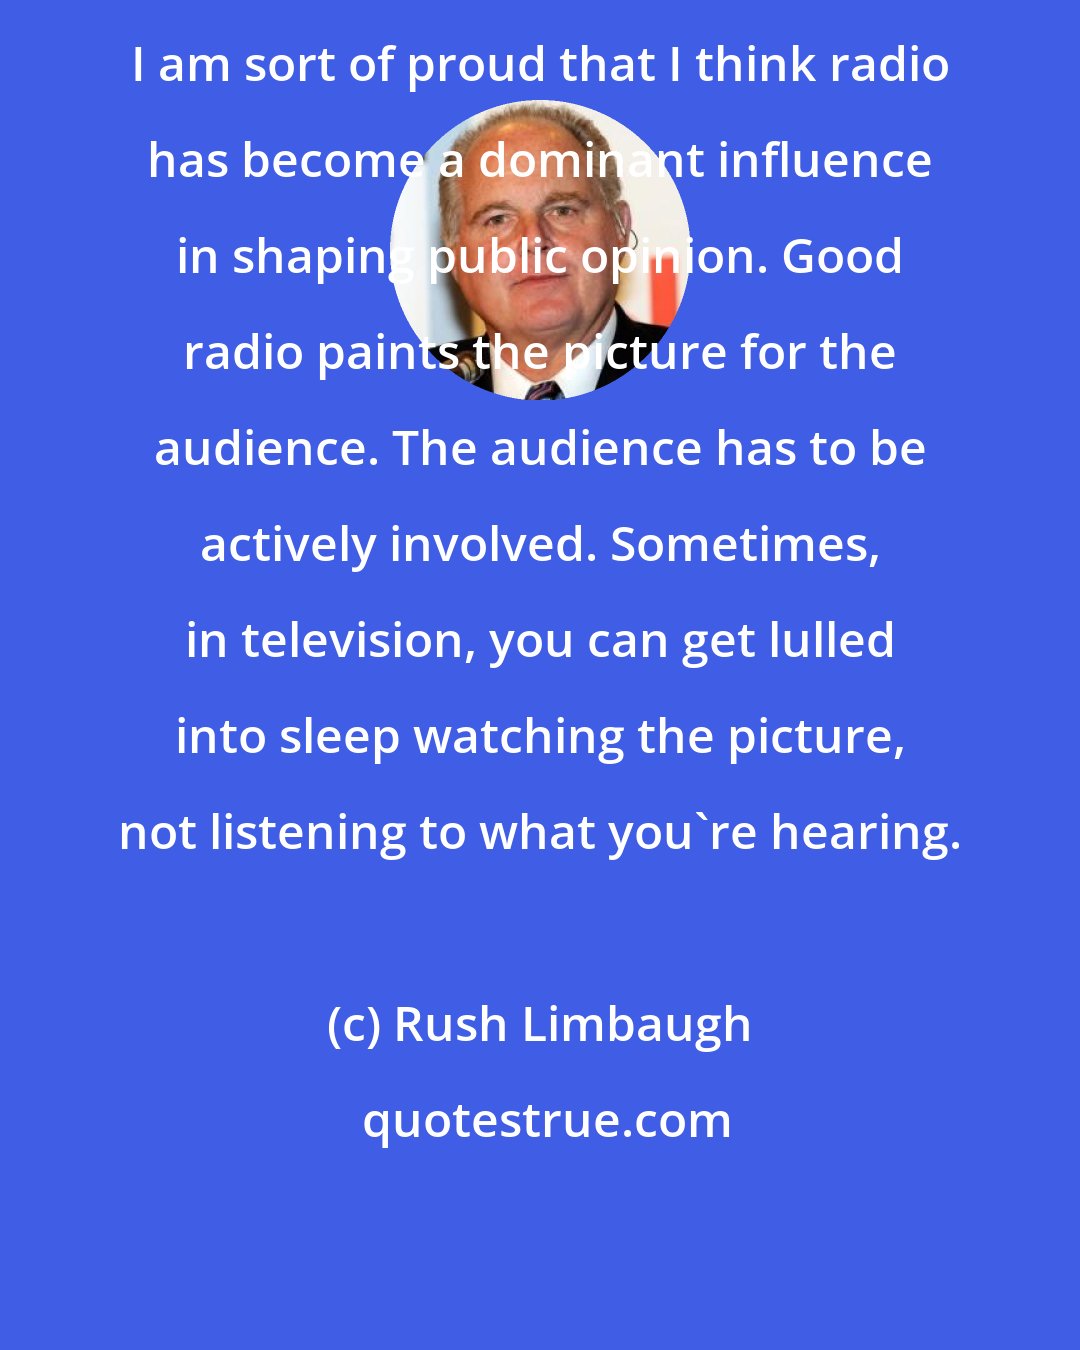 Rush Limbaugh: I am sort of proud that I think radio has become a dominant influence in shaping public opinion. Good radio paints the picture for the audience. The audience has to be actively involved. Sometimes, in television, you can get lulled into sleep watching the picture, not listening to what you're hearing.